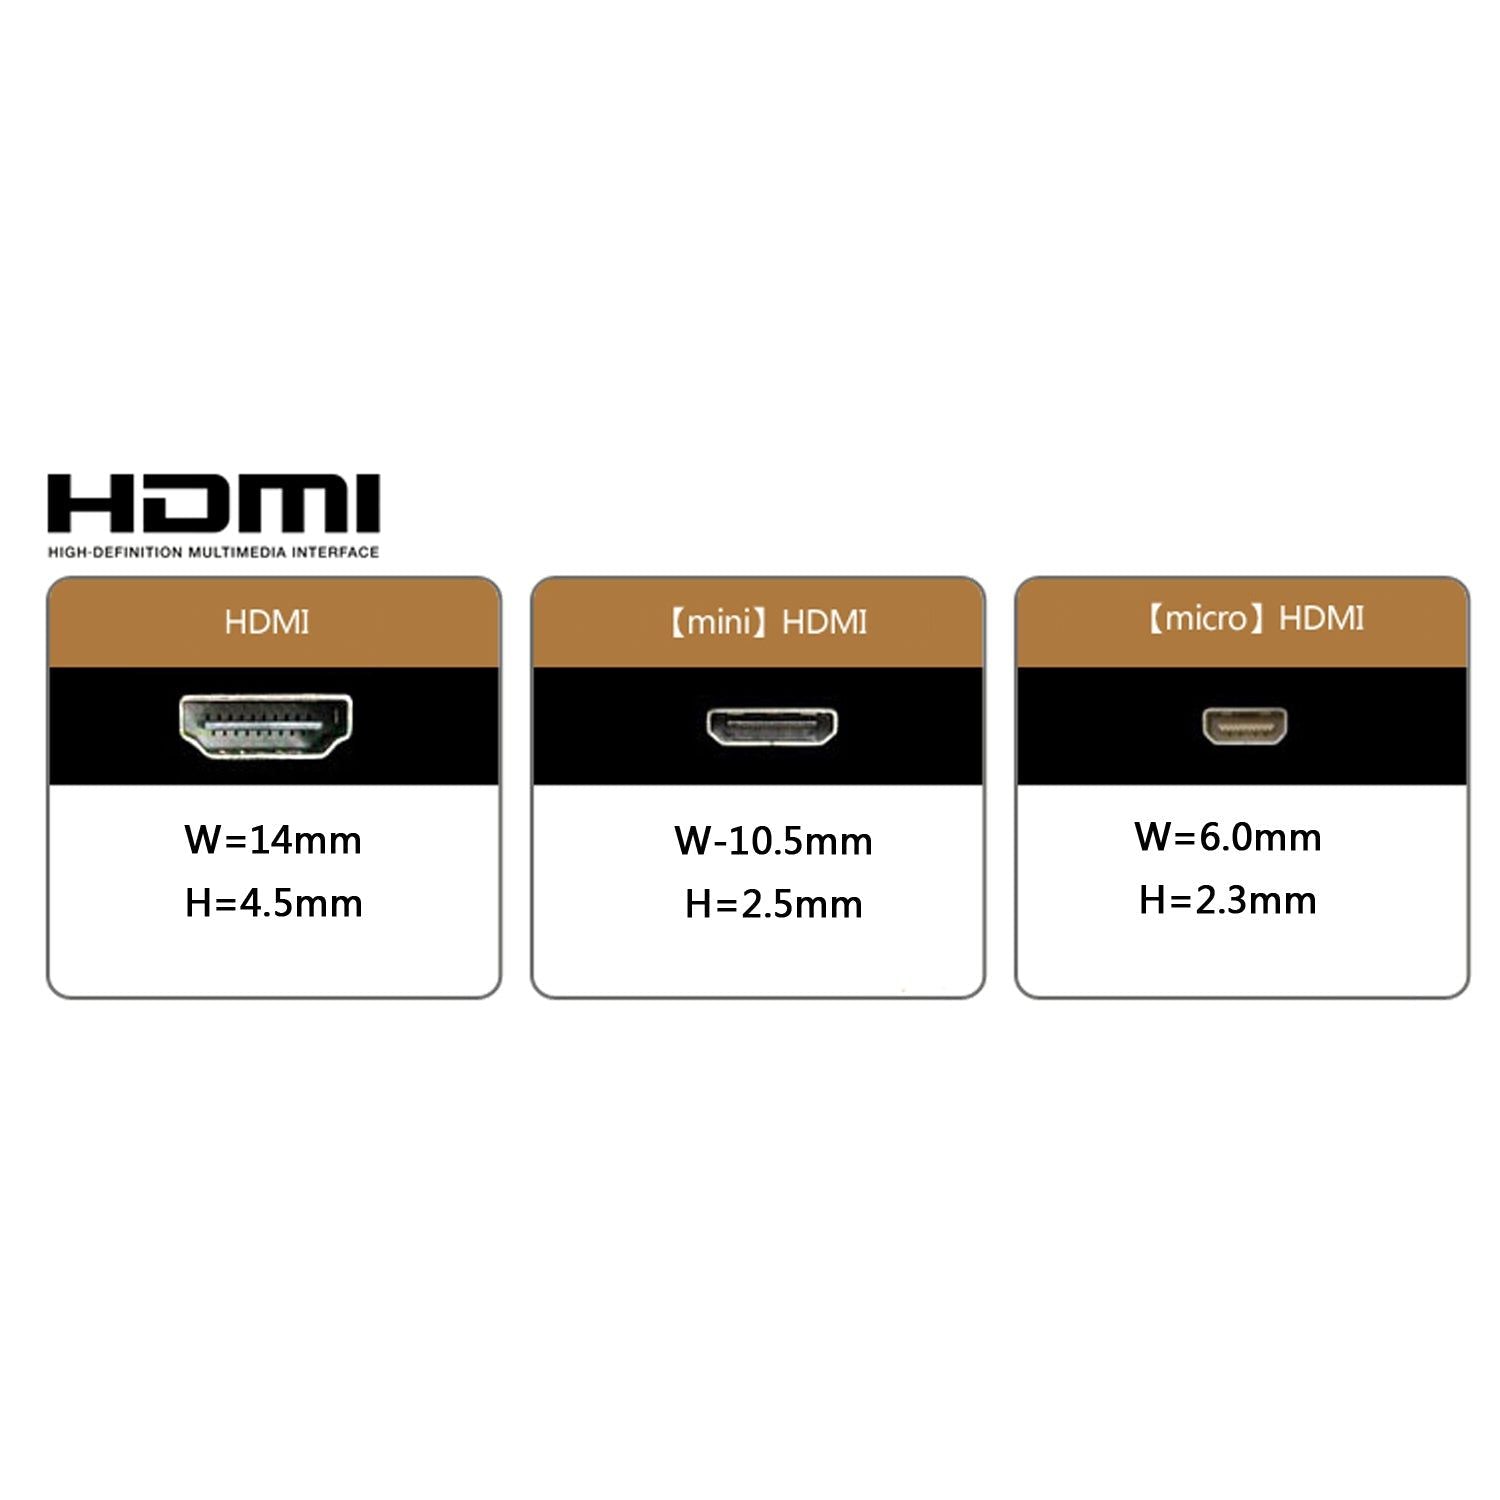 0.5M Dual 90 Degree Down Angled HDMI Type A Male to Male HDTV FPC Flat Cable Cord for FPV HDTV Multicopter Aerial Photography - UNIQKART